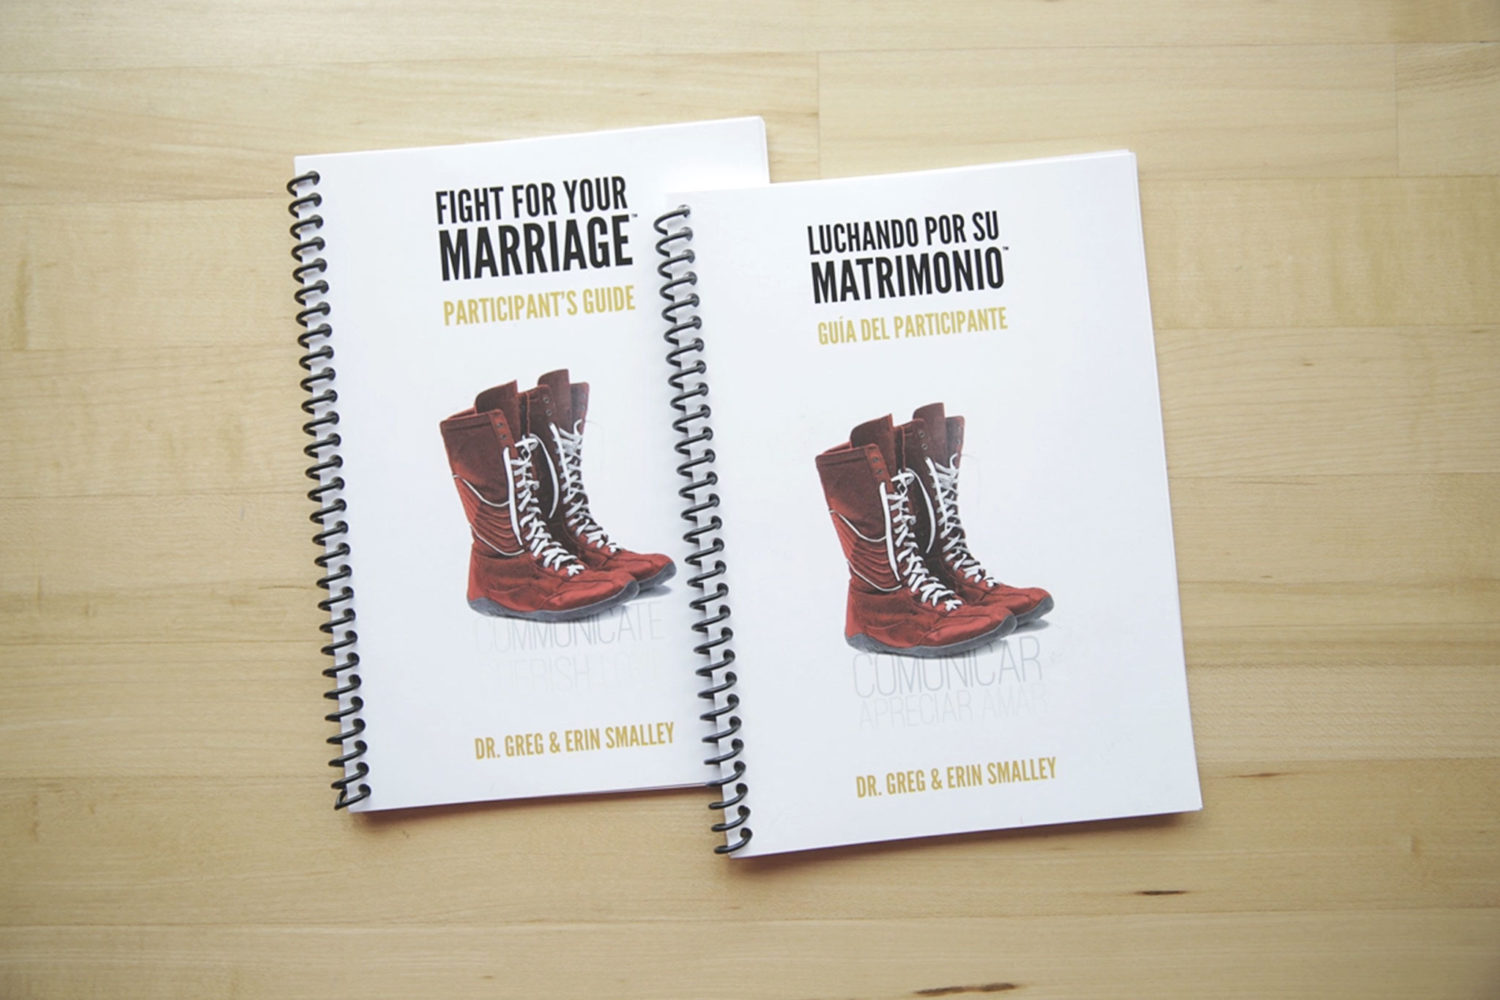 English and Spanish versions of the Fight for Your Marriage Participant Guide